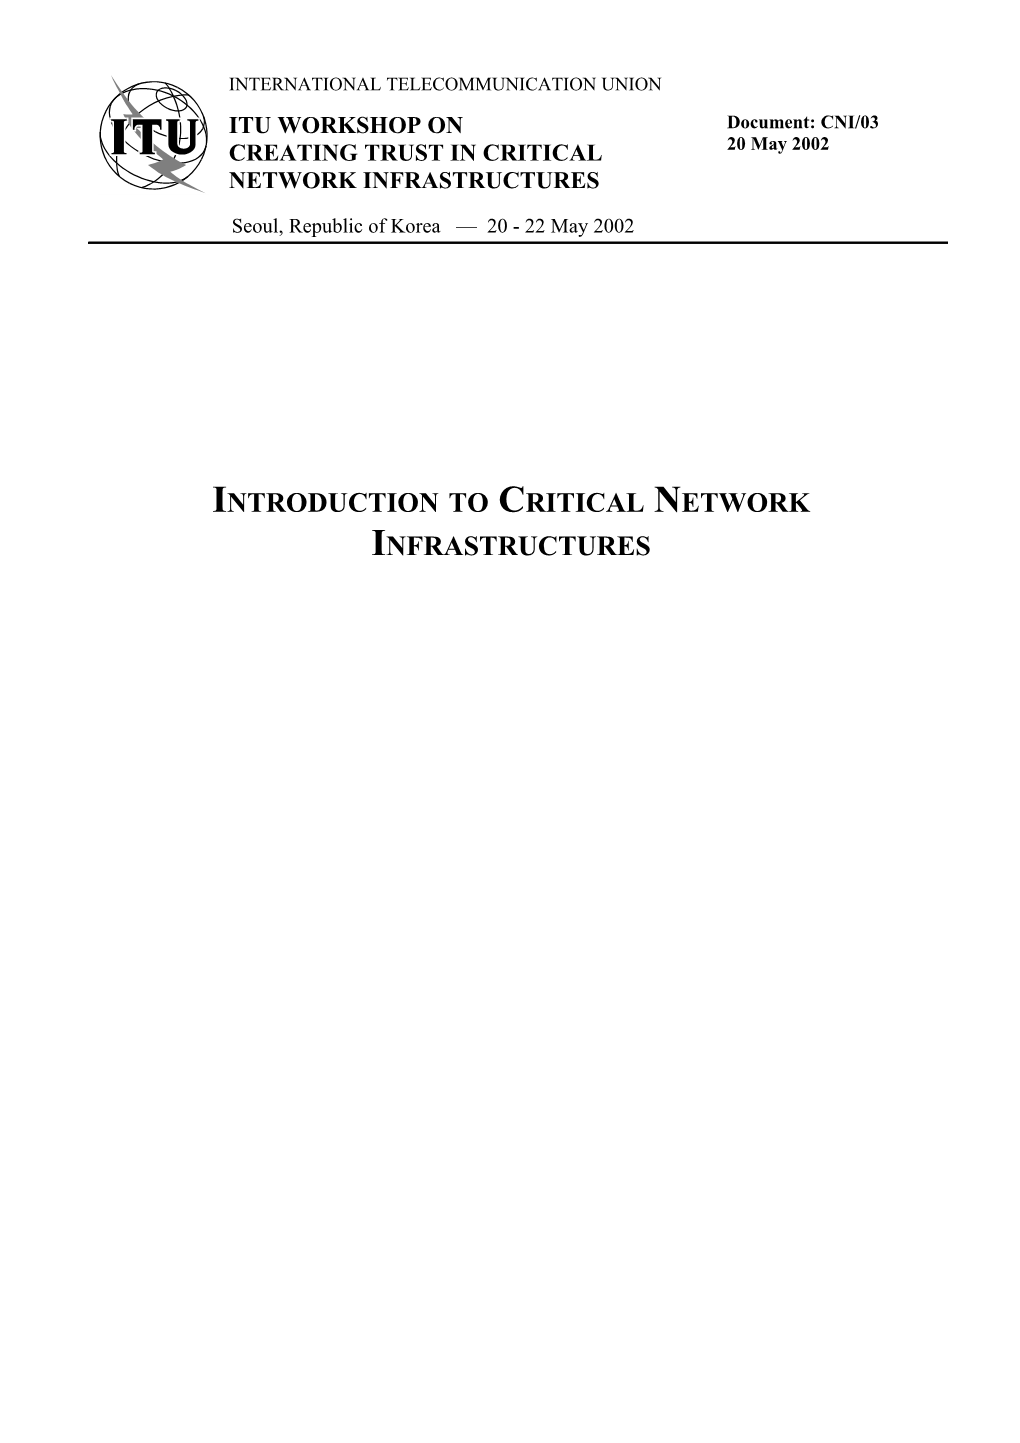 Introduction to Critical Critical Network Network Infrastructureinfrastructures